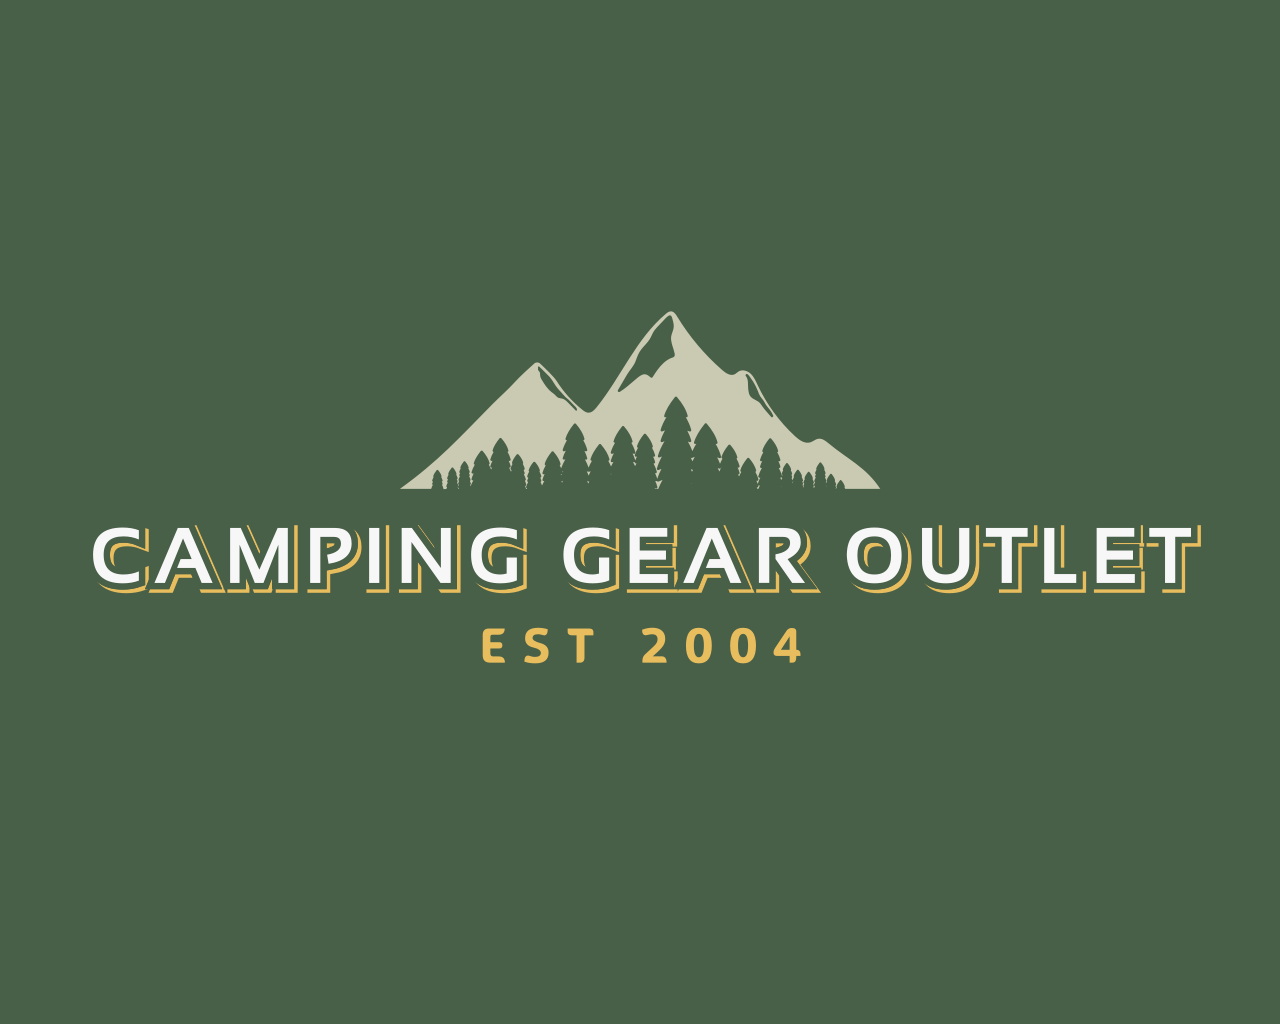 CMI Double Ended 2-3/8 Pully - Camping Gear Outlet